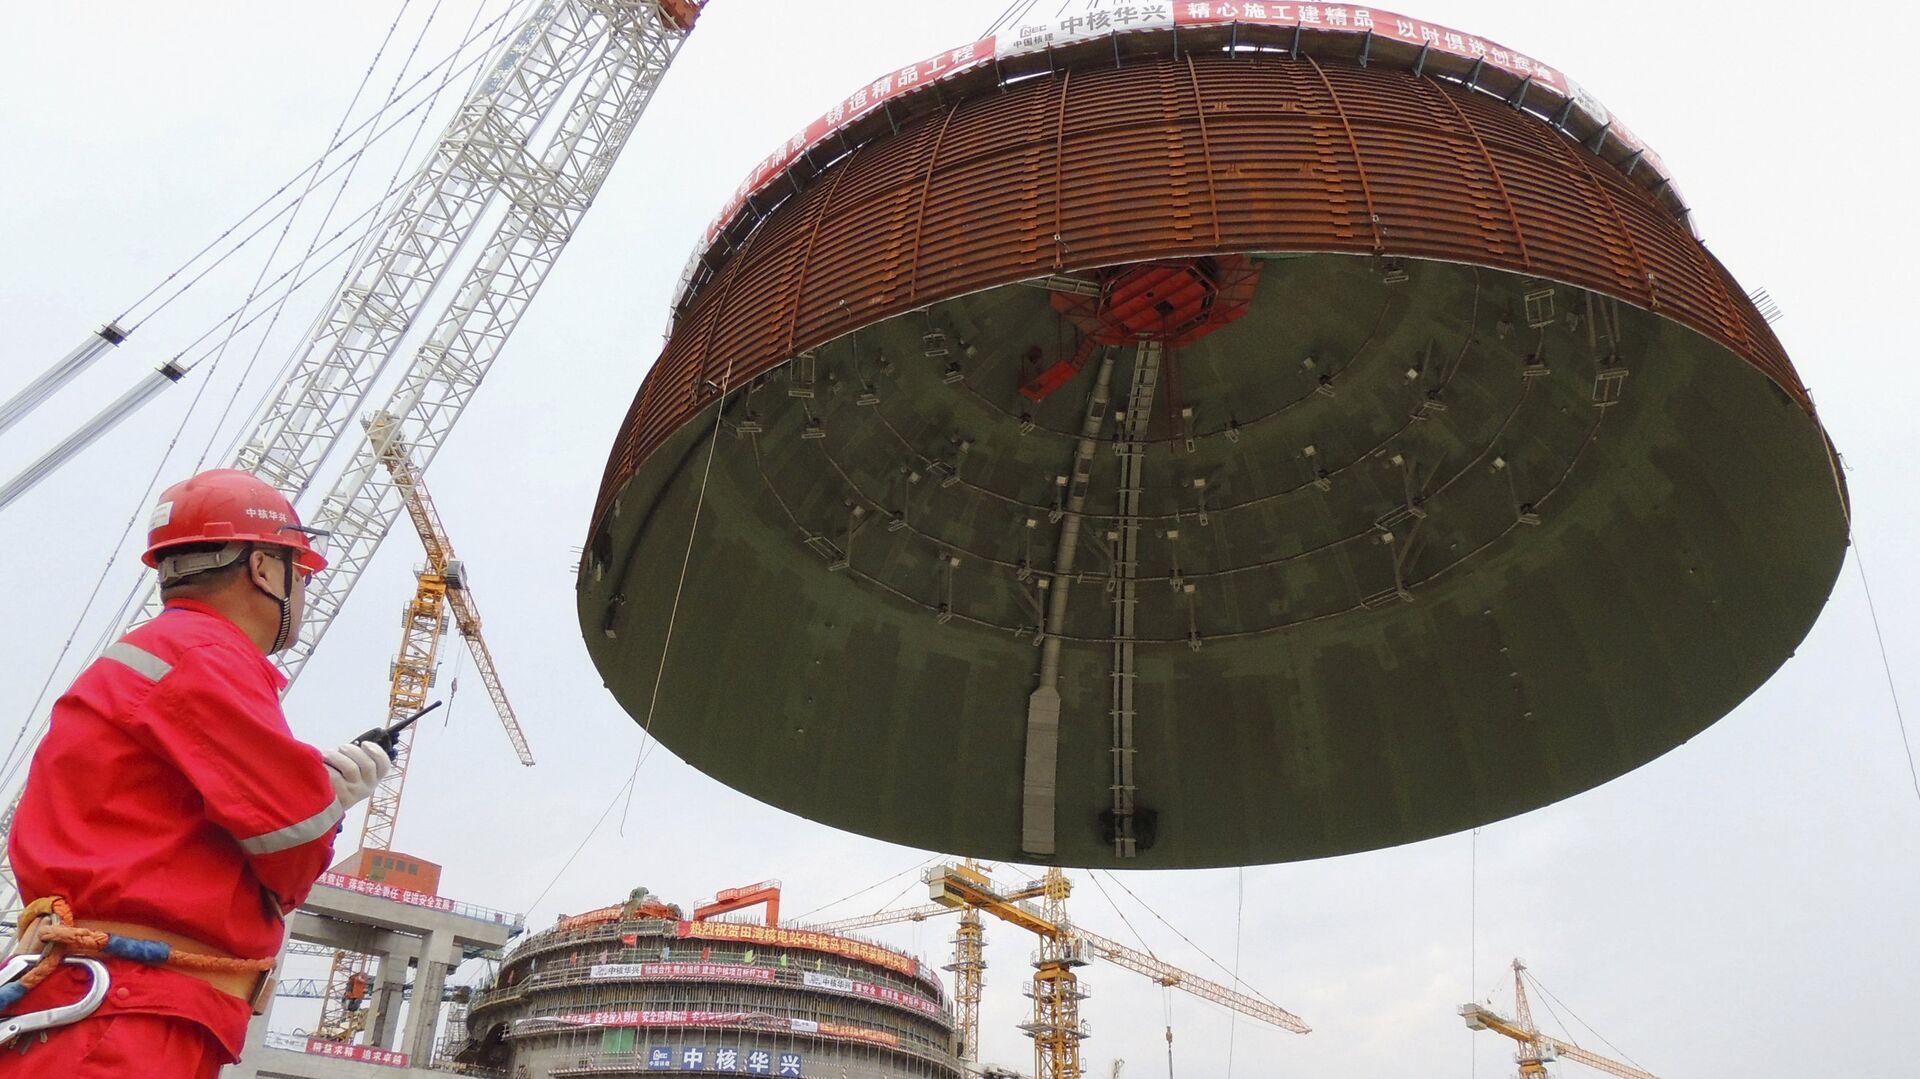 A worker looks on as the dome roof of a generator unit is lifted to be installed, at Tianwan Nuclear Power Plant, in Lianyungang, Jiangsu province, China, September 26, 2015. - Sputnik Mundo, 1920, 19.05.2021